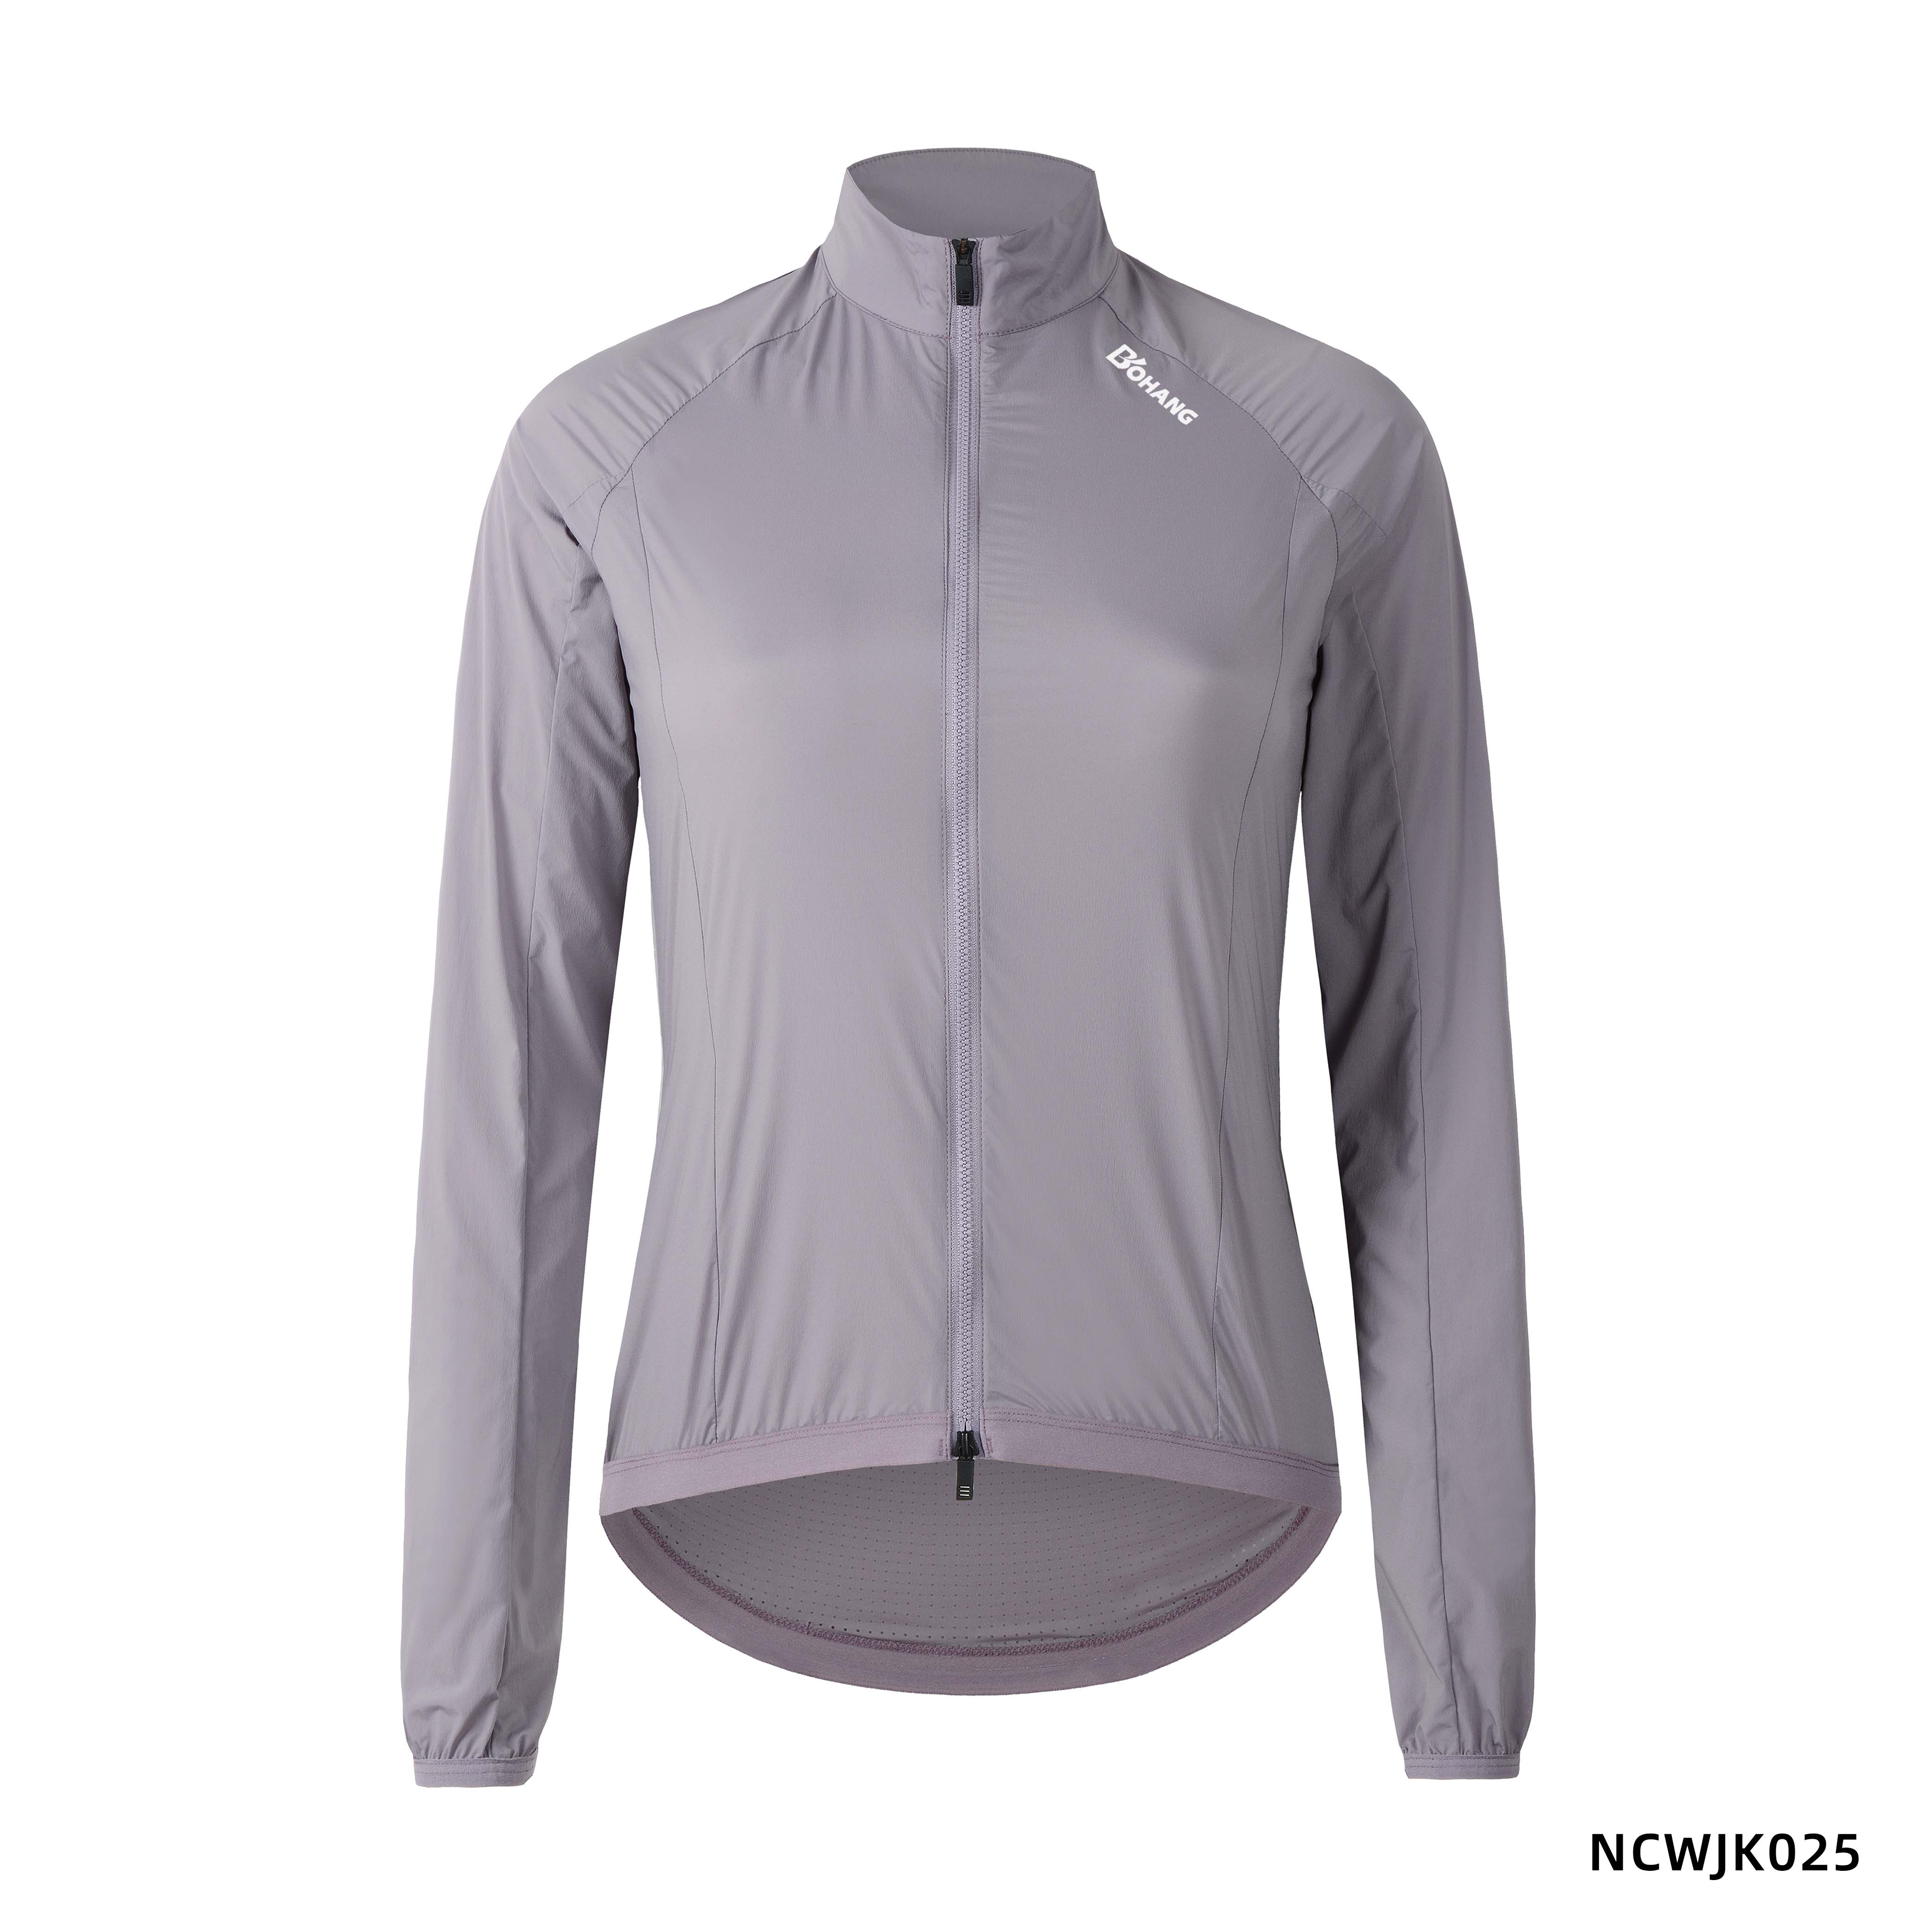 Top three women's lightweight cycling jackets for 2023